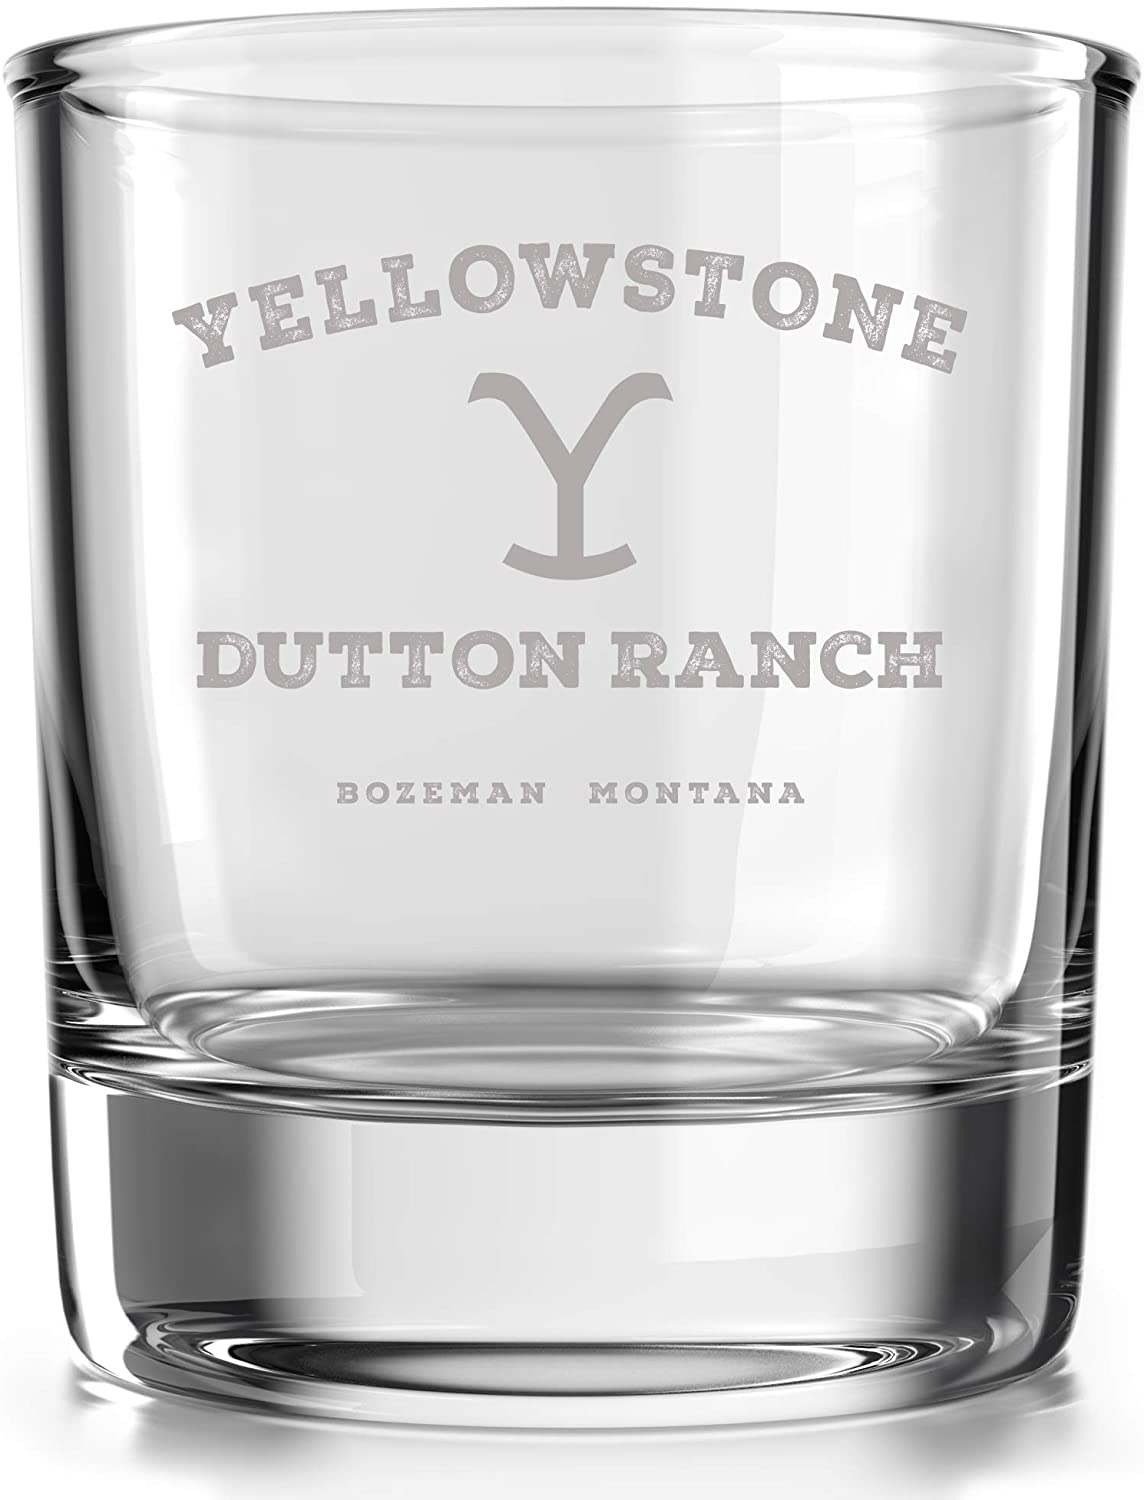 Yellowstone Dutton Ranch Bozeman Montana - Old Fashioned Whiskey Rocks Bourbon Glass - 10 oz capacity - Made in the USA